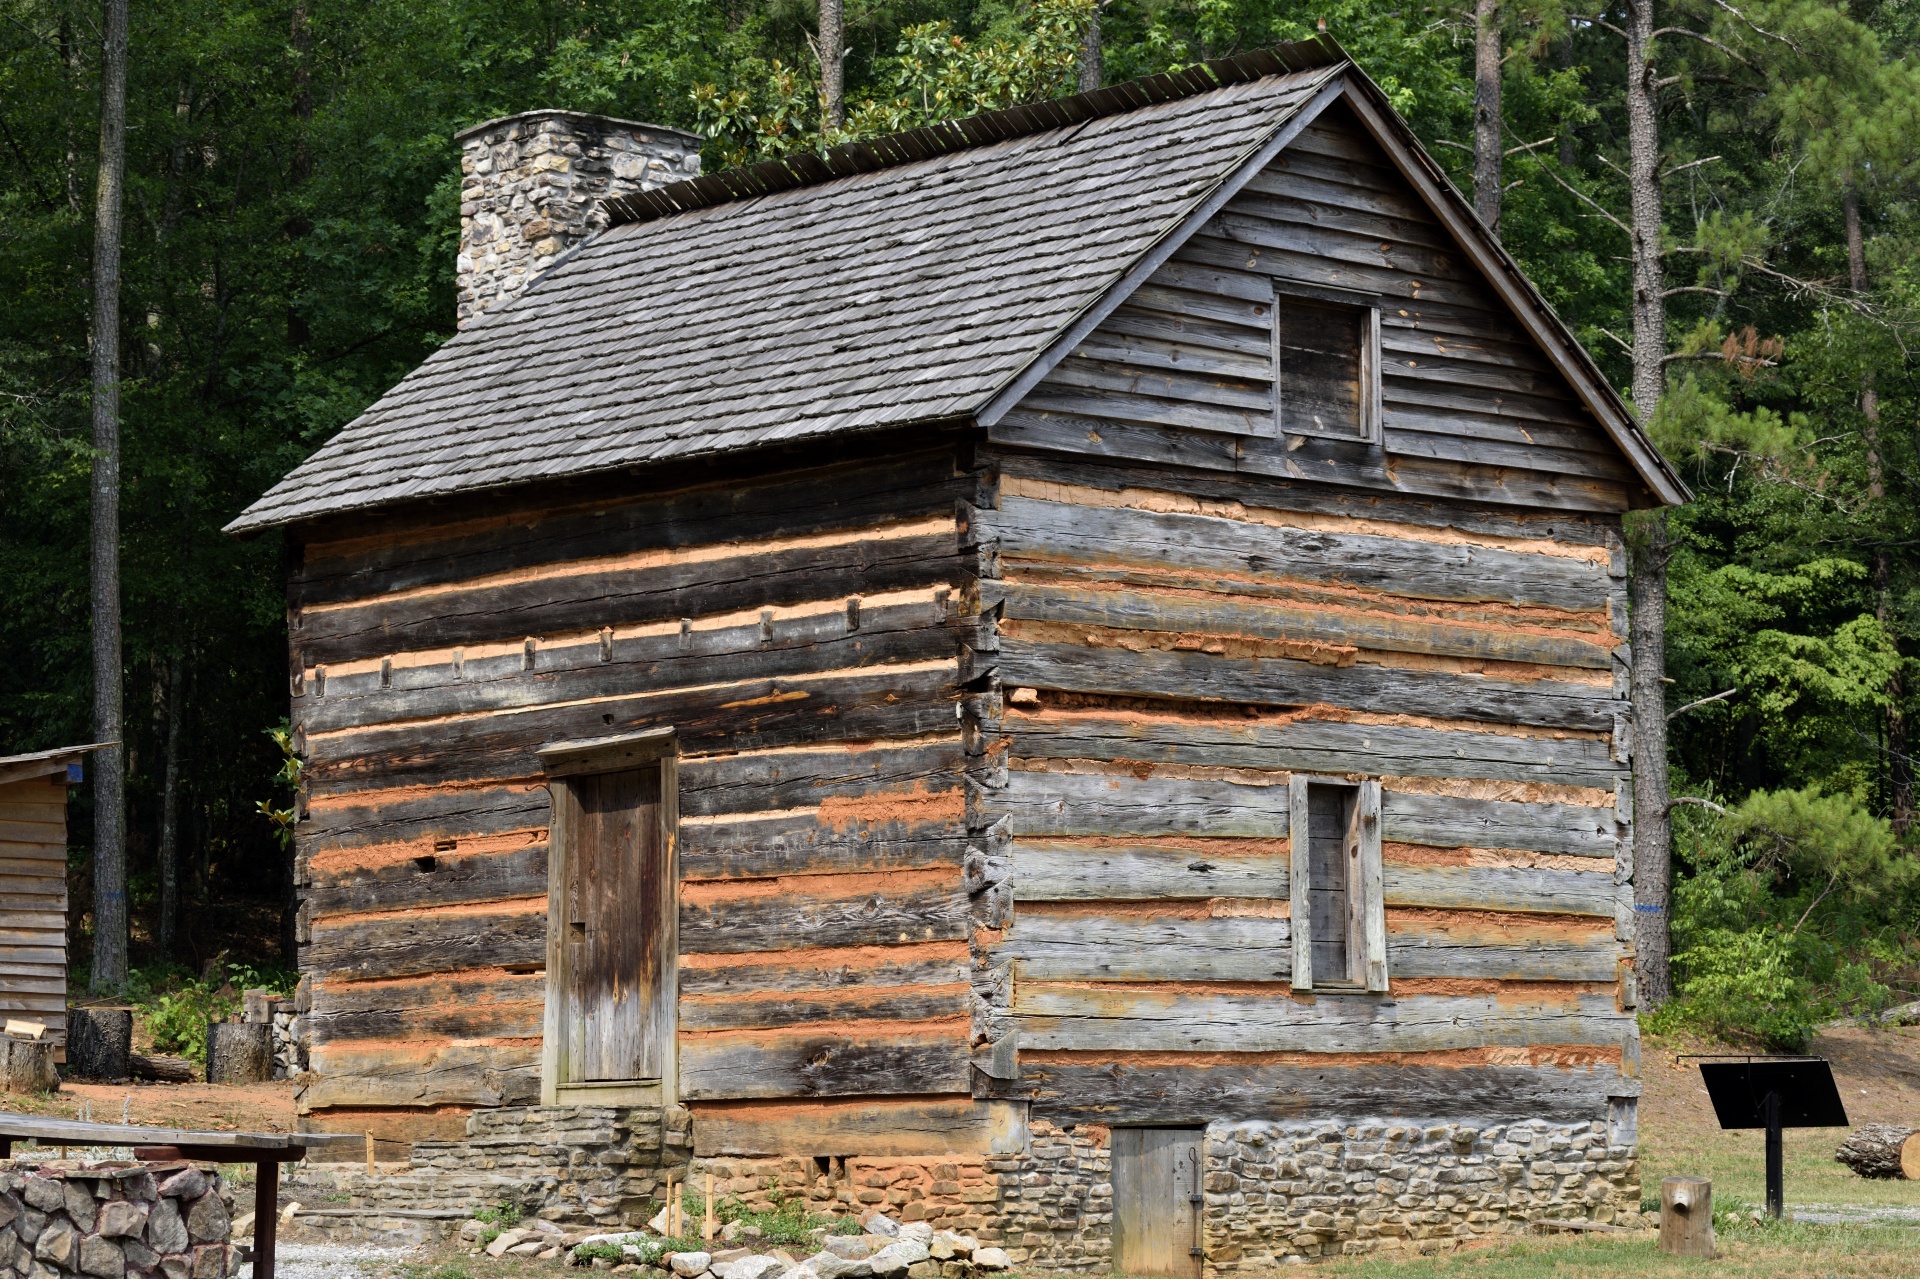 Old pioneer cabin background at Georgia, USA